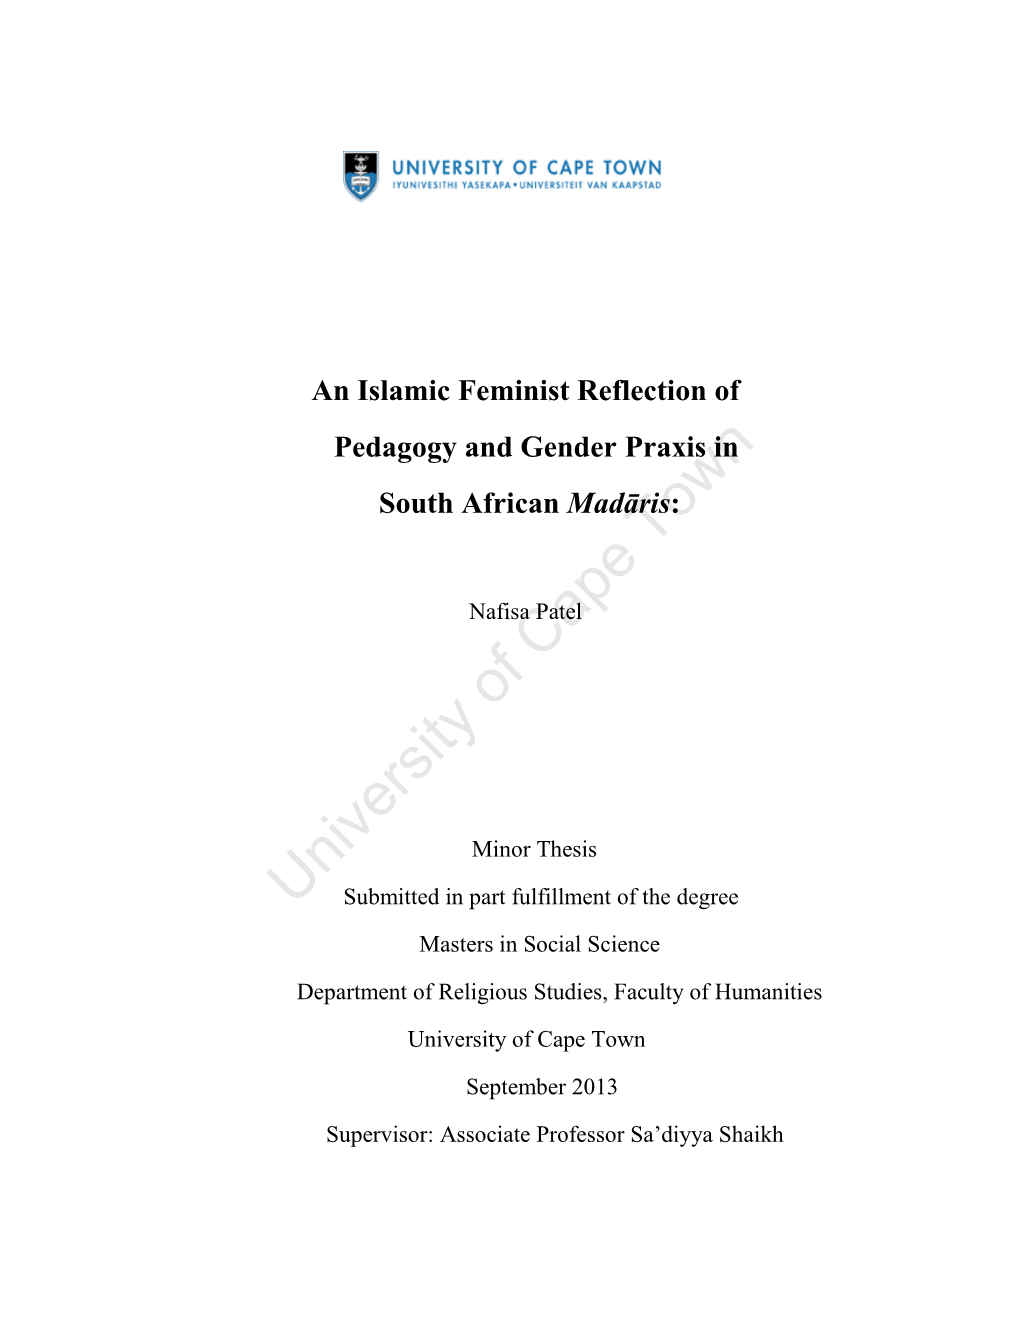 An Islamic Femint Reflection of Pedagogy and Gender Praxis In